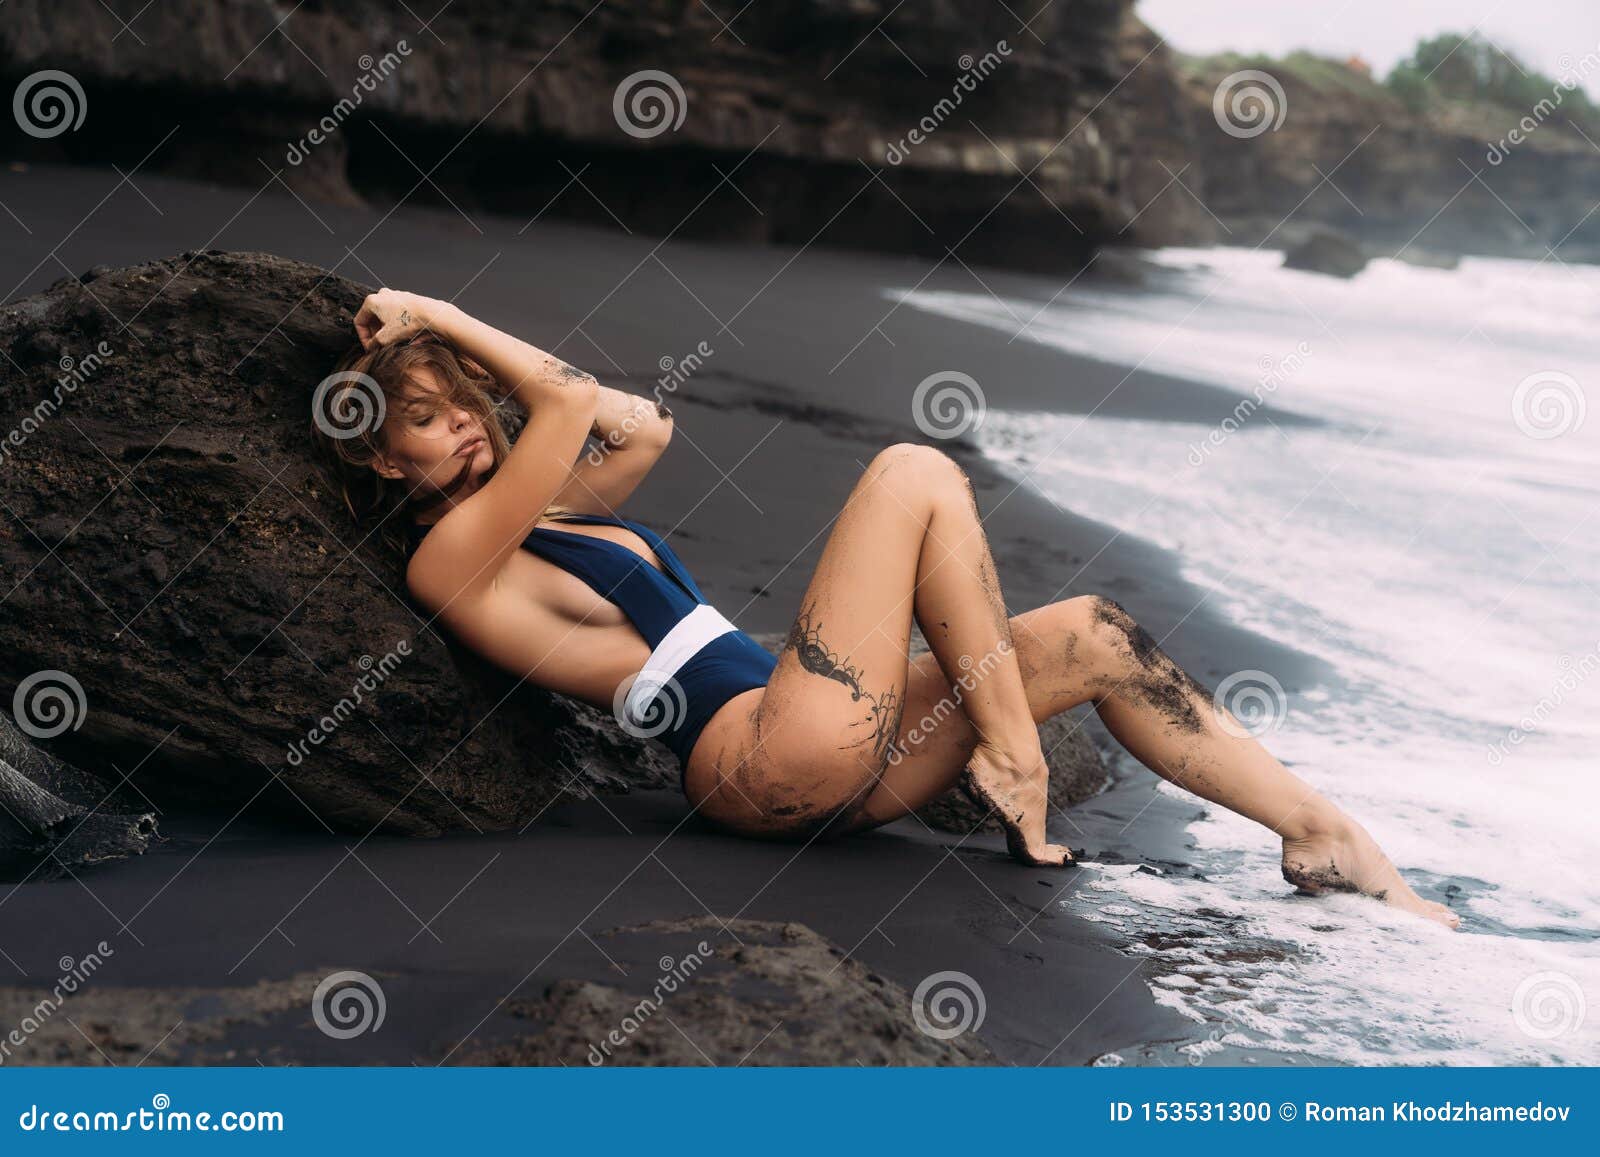 Girl with Big Breasts in Blue Swimwear Relaxing at Beach with Black Sand.  Stock Photo - Image of lifestyle, beach: 153531300